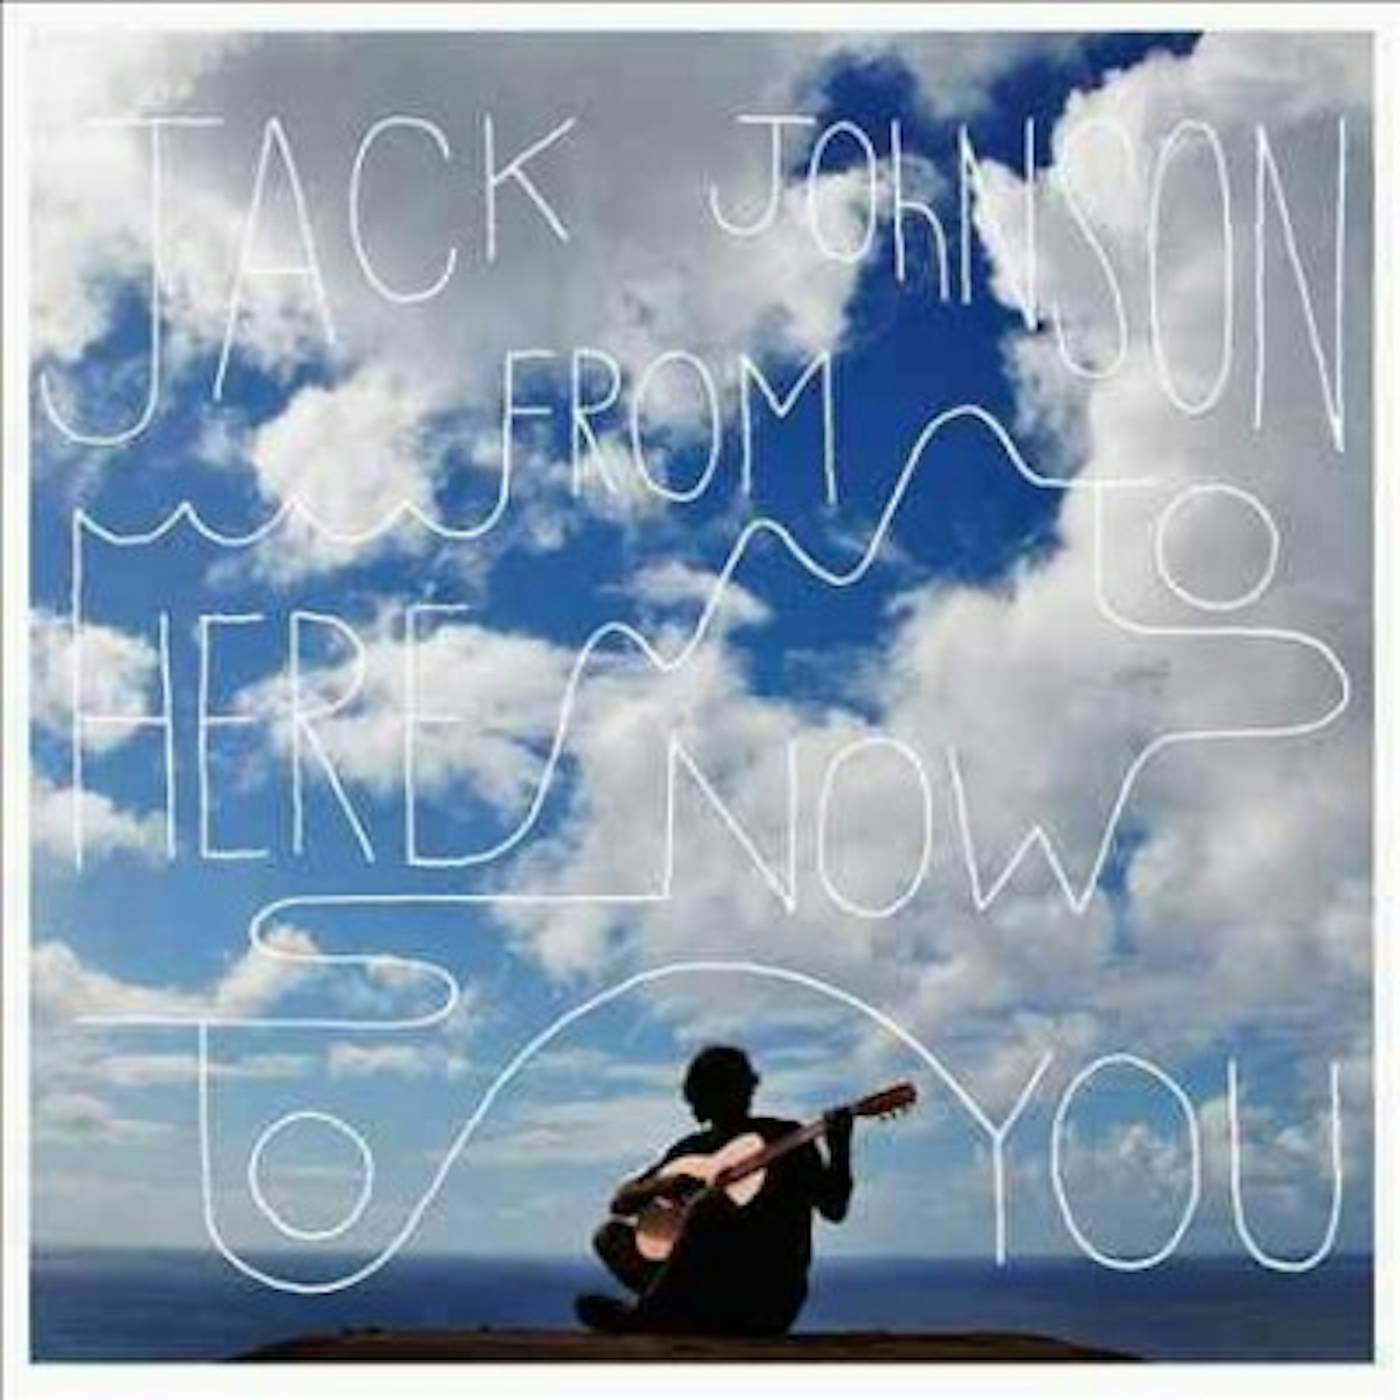 Jack Johnson From Here To Now To You Vinyl Record